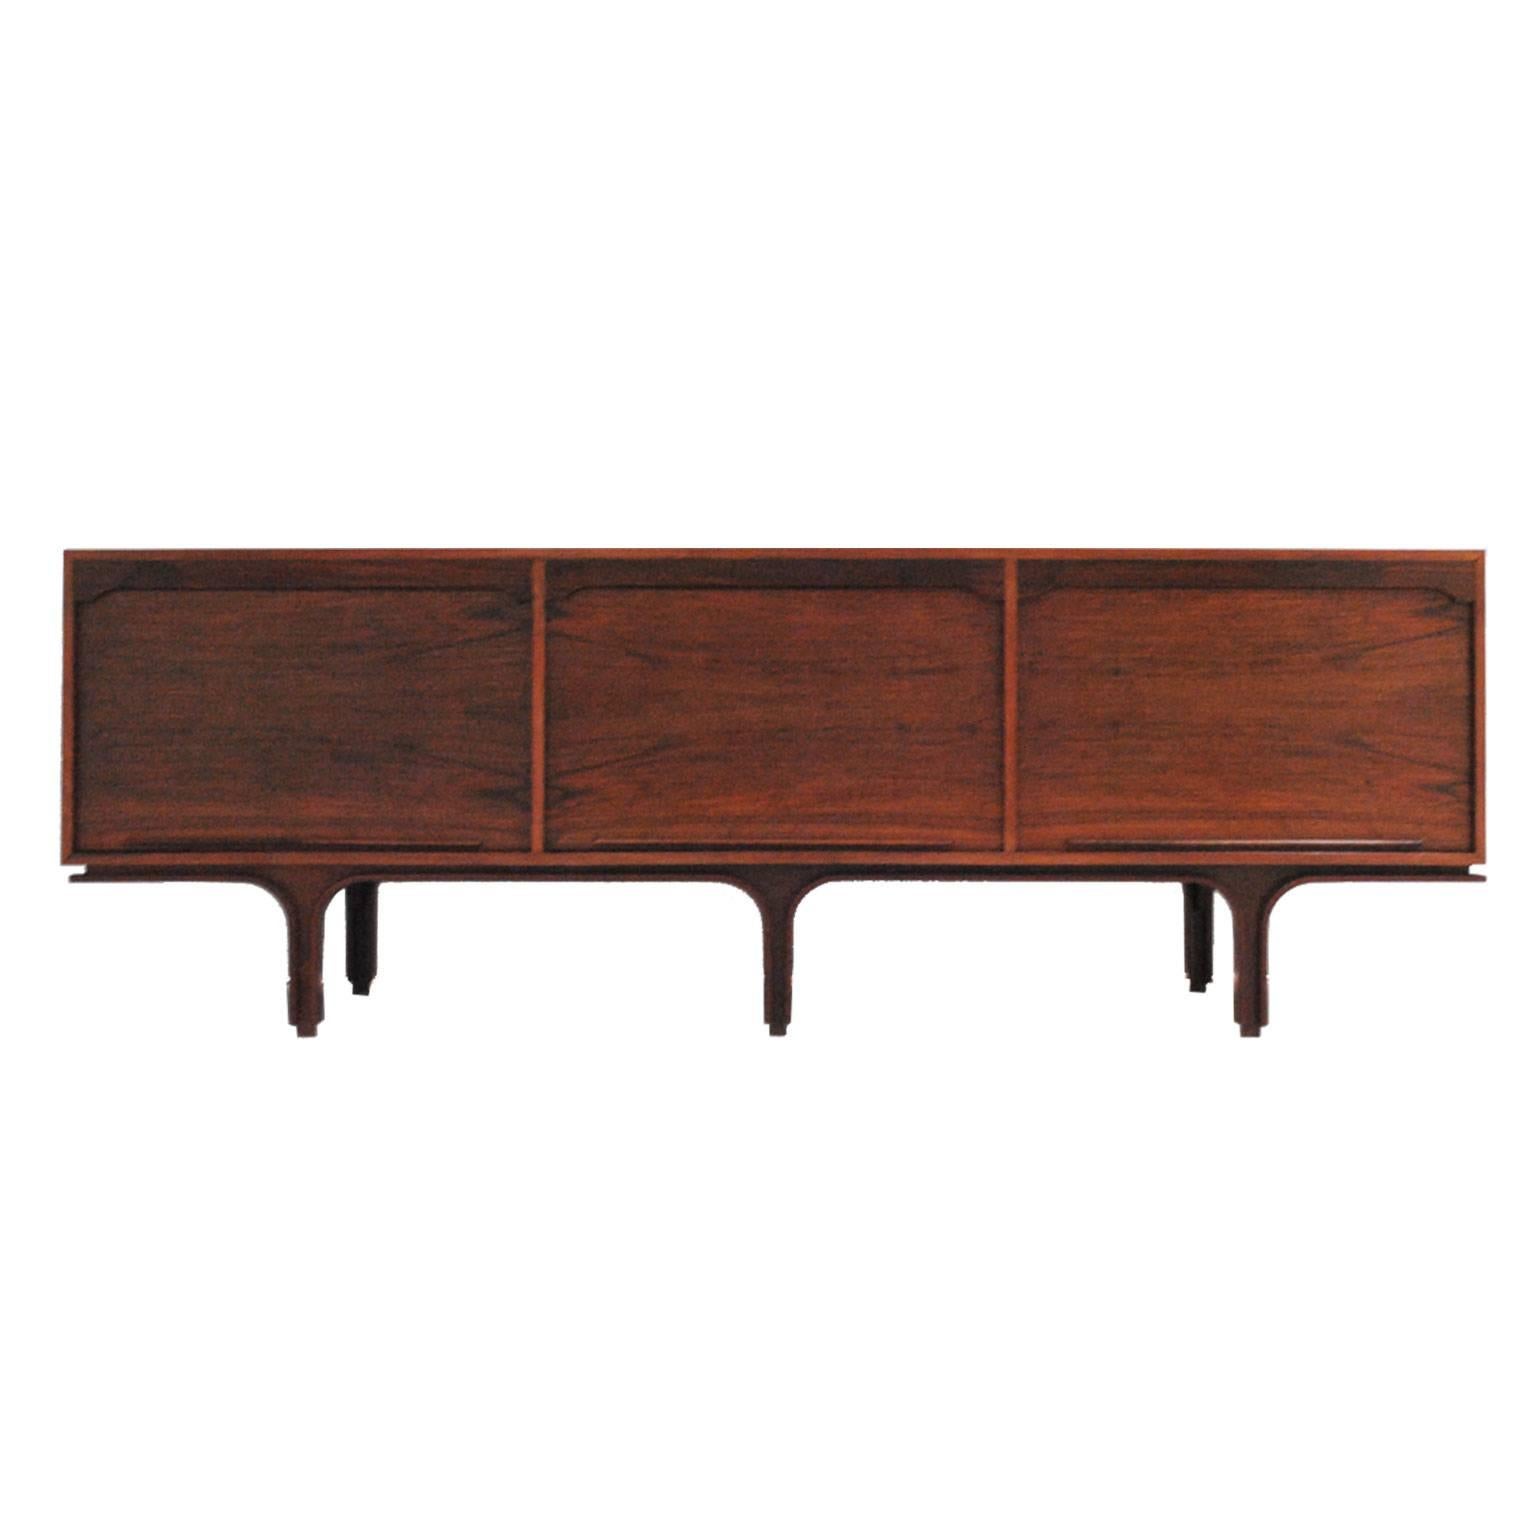 Sideboard designed by Gianfranco Frattini for Bernini. Made in solid wood with rosewood finish. It is composed of three doors with front in blind and drawers on the inside.